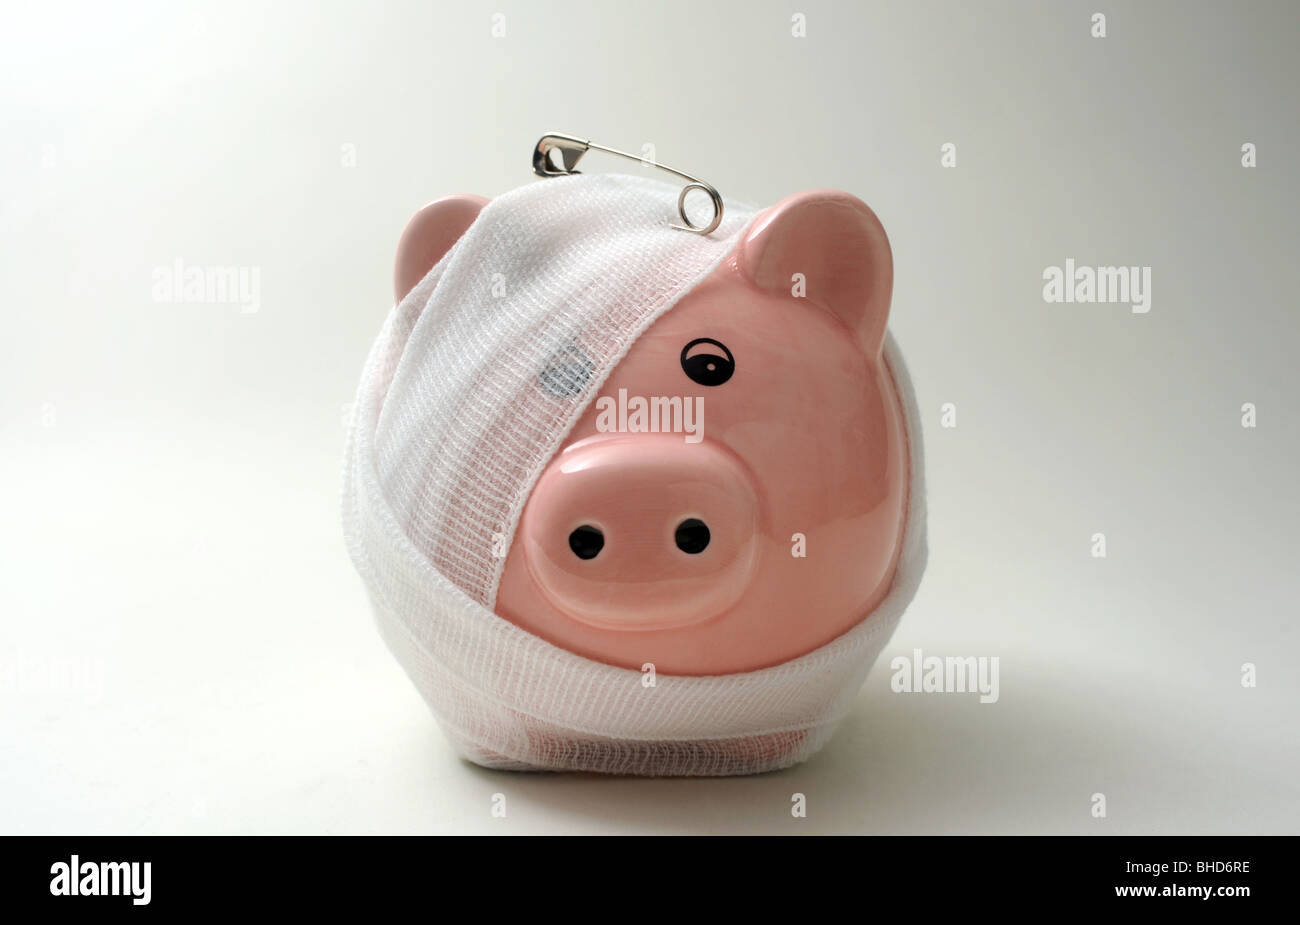 BANDAGED/INJURED PIGGYBANK WITH SAFETY PIN RE FINANCE LOANS CASH MONEY SAVINGS PIGGY BANK BANKS MORTGAGES INCOMES WAGES UK ETC Stock Photo